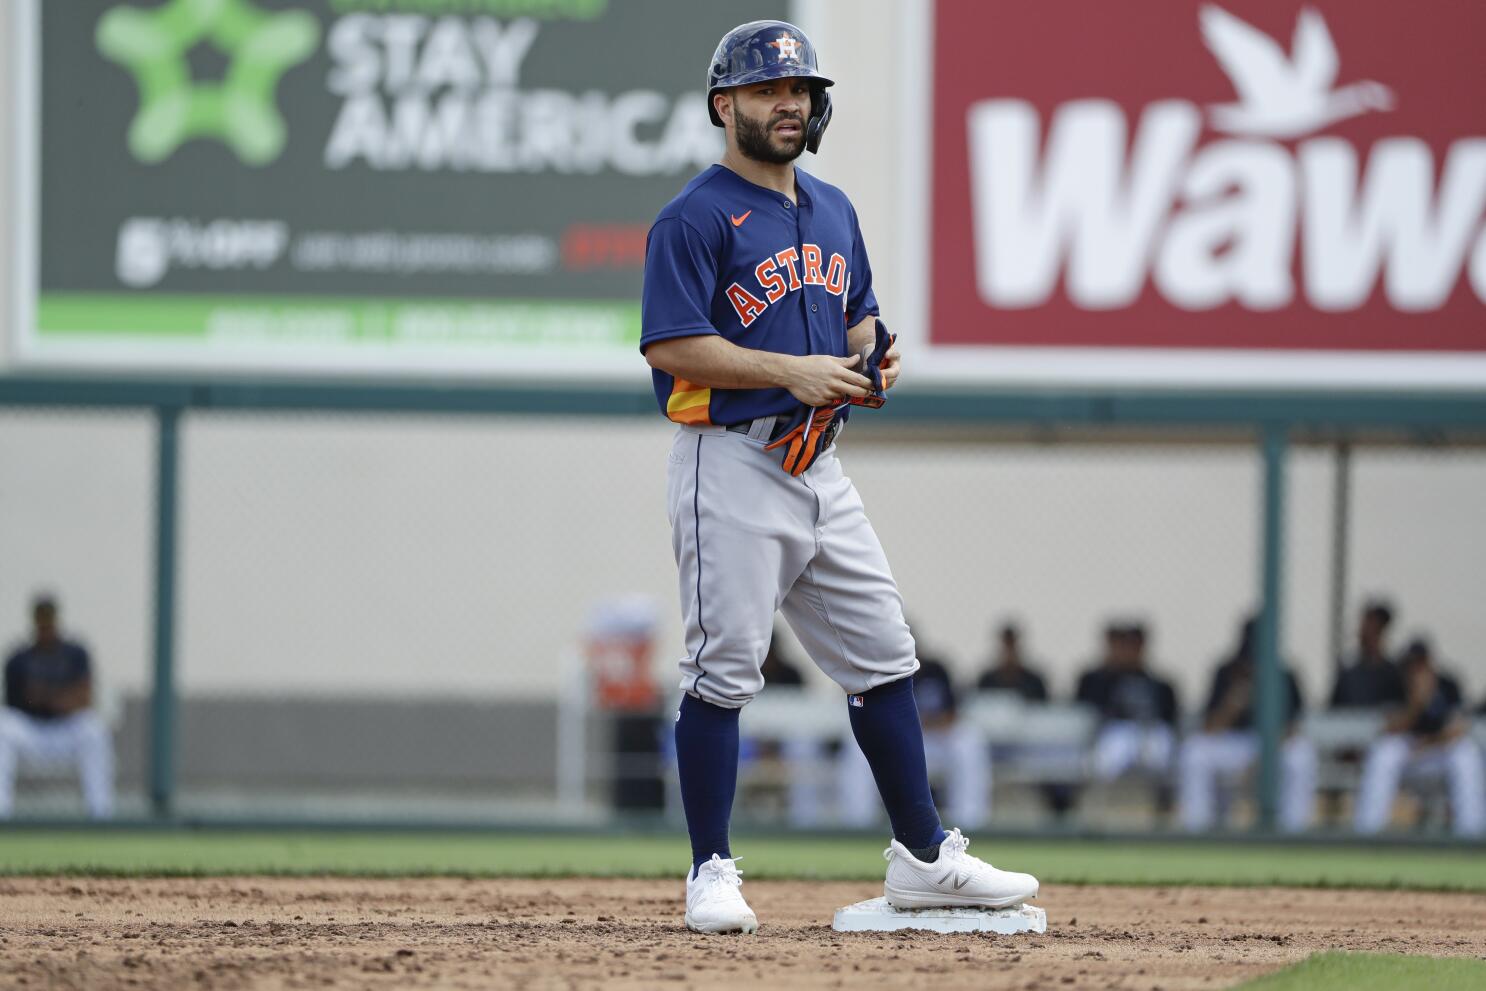 Jose Altuve named Player of the Year by fellow MLB players